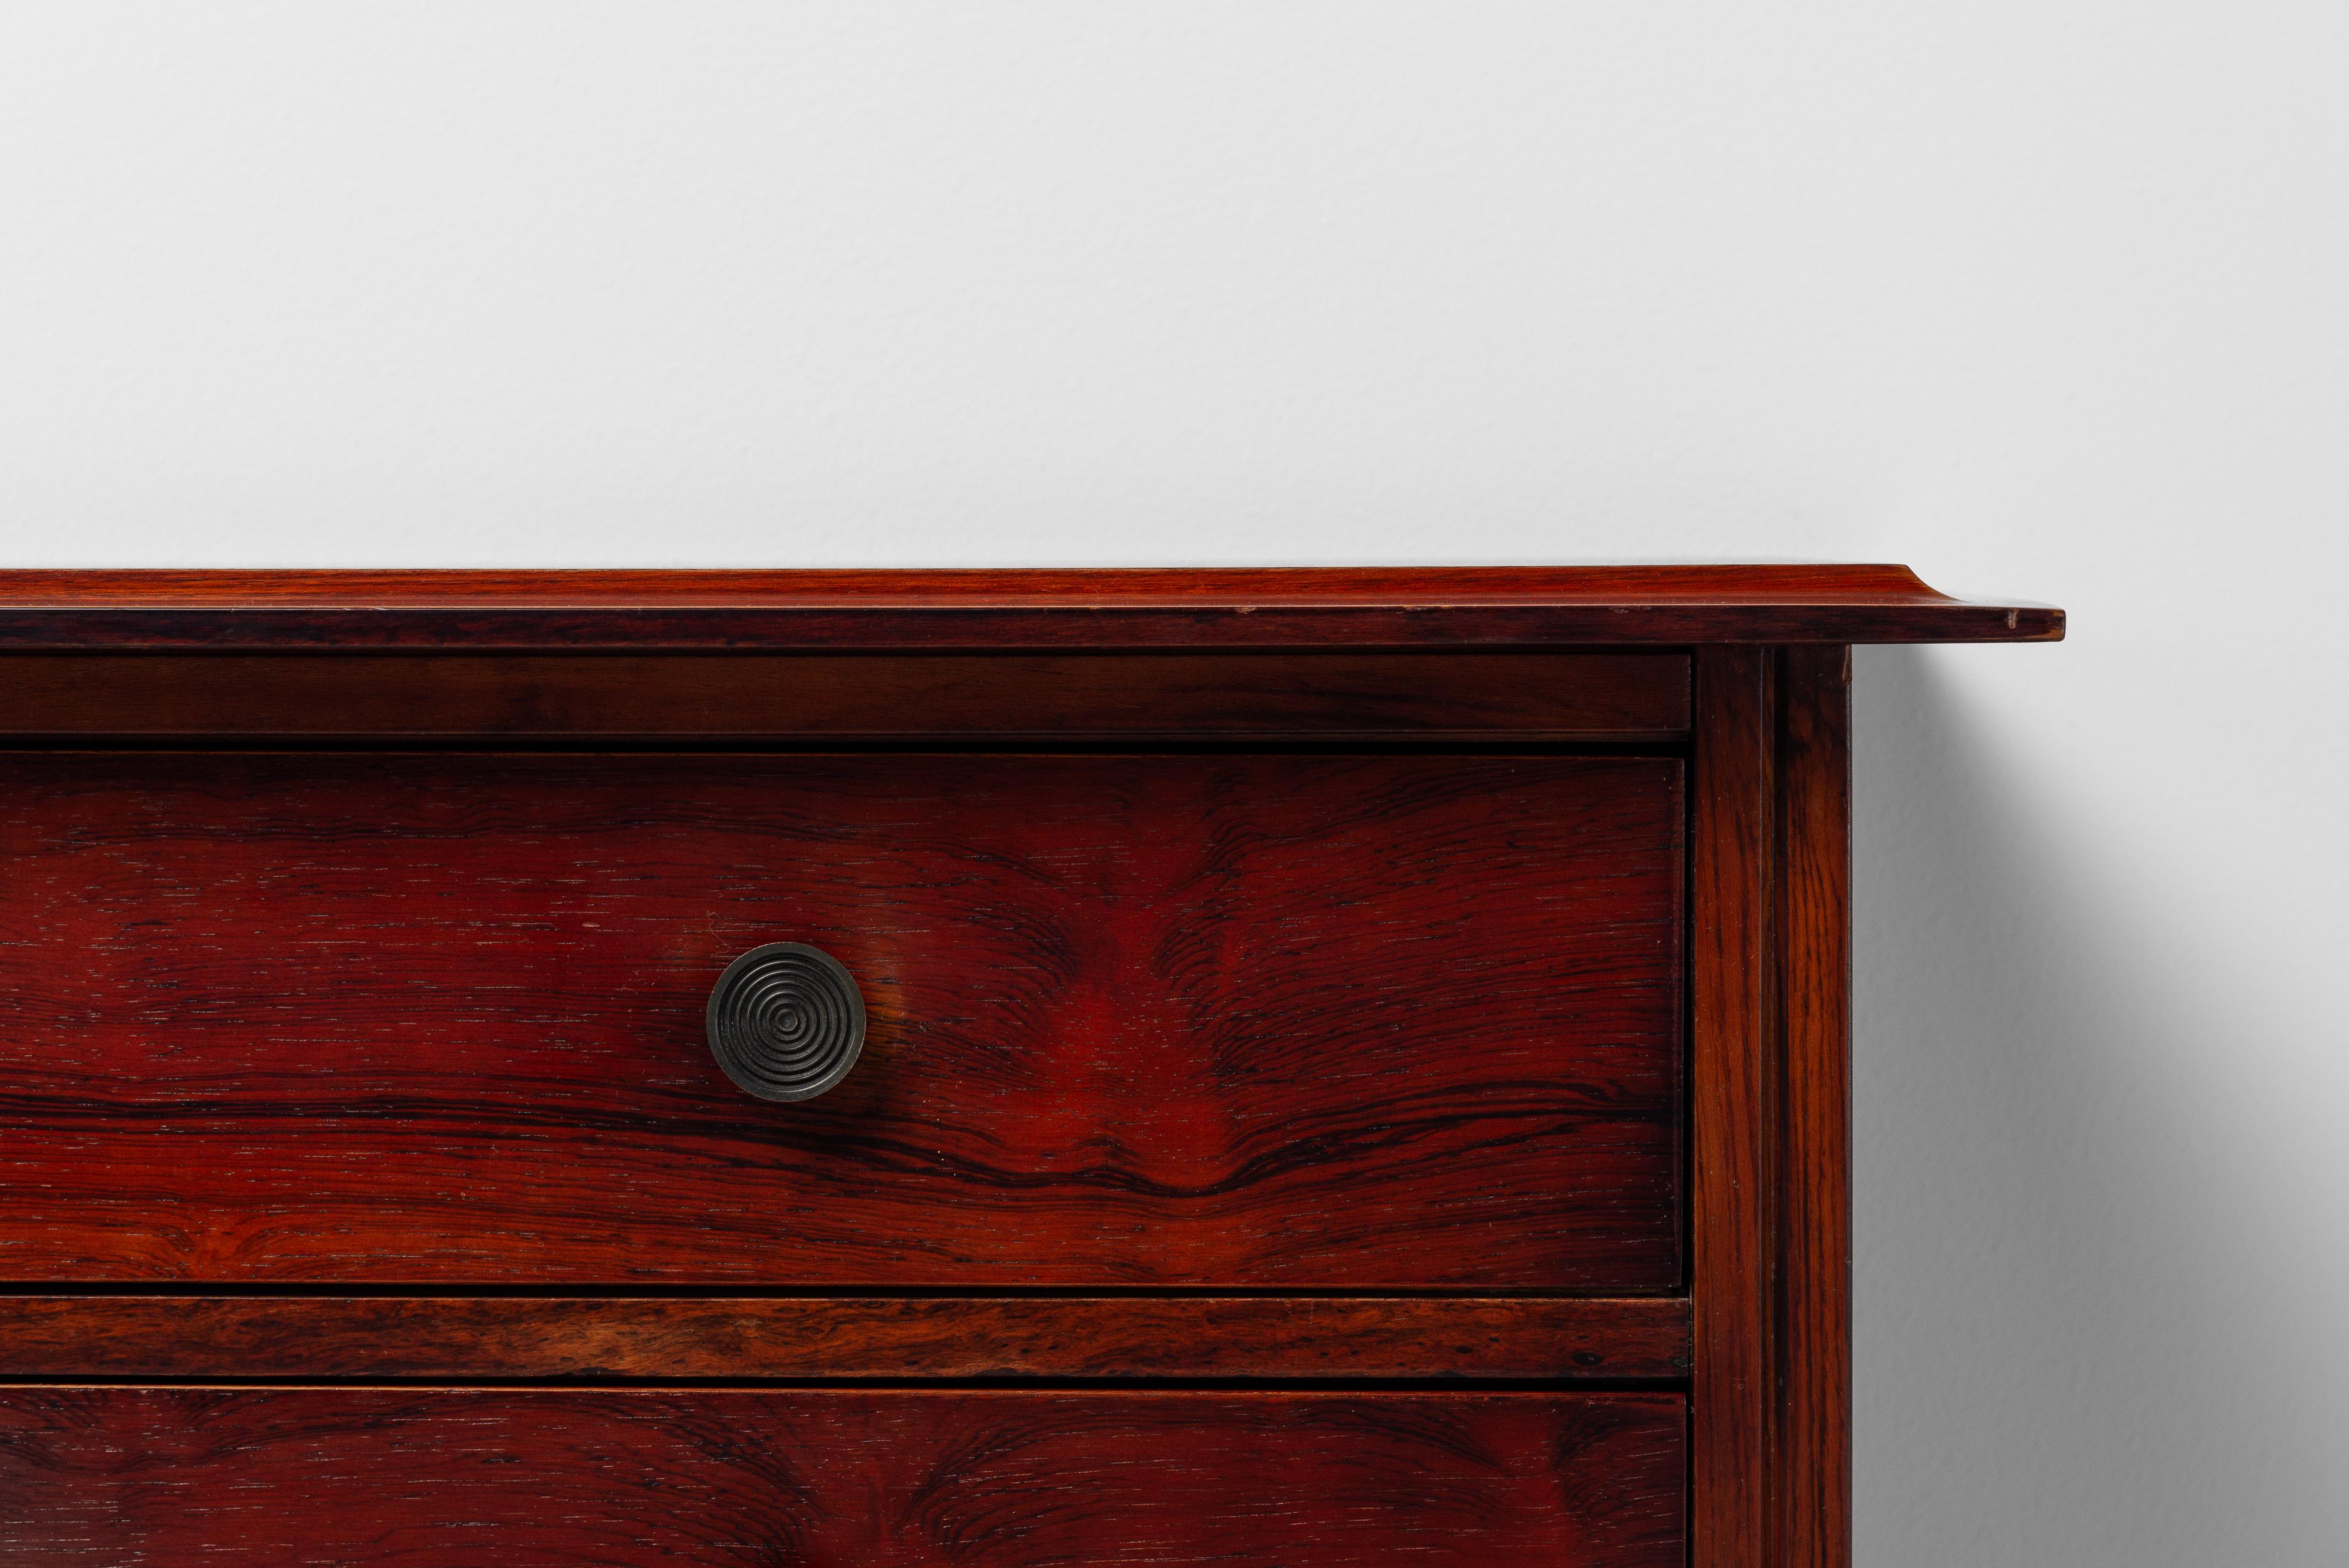 Elegant chest of drawers, model DC154, designed by Carlo de Carli and made by Sormani in Italy in 1963. It comes in different versions, but the rosewood one is considered the finest. The wood has a beautiful grain, and it's tastefully detailed with